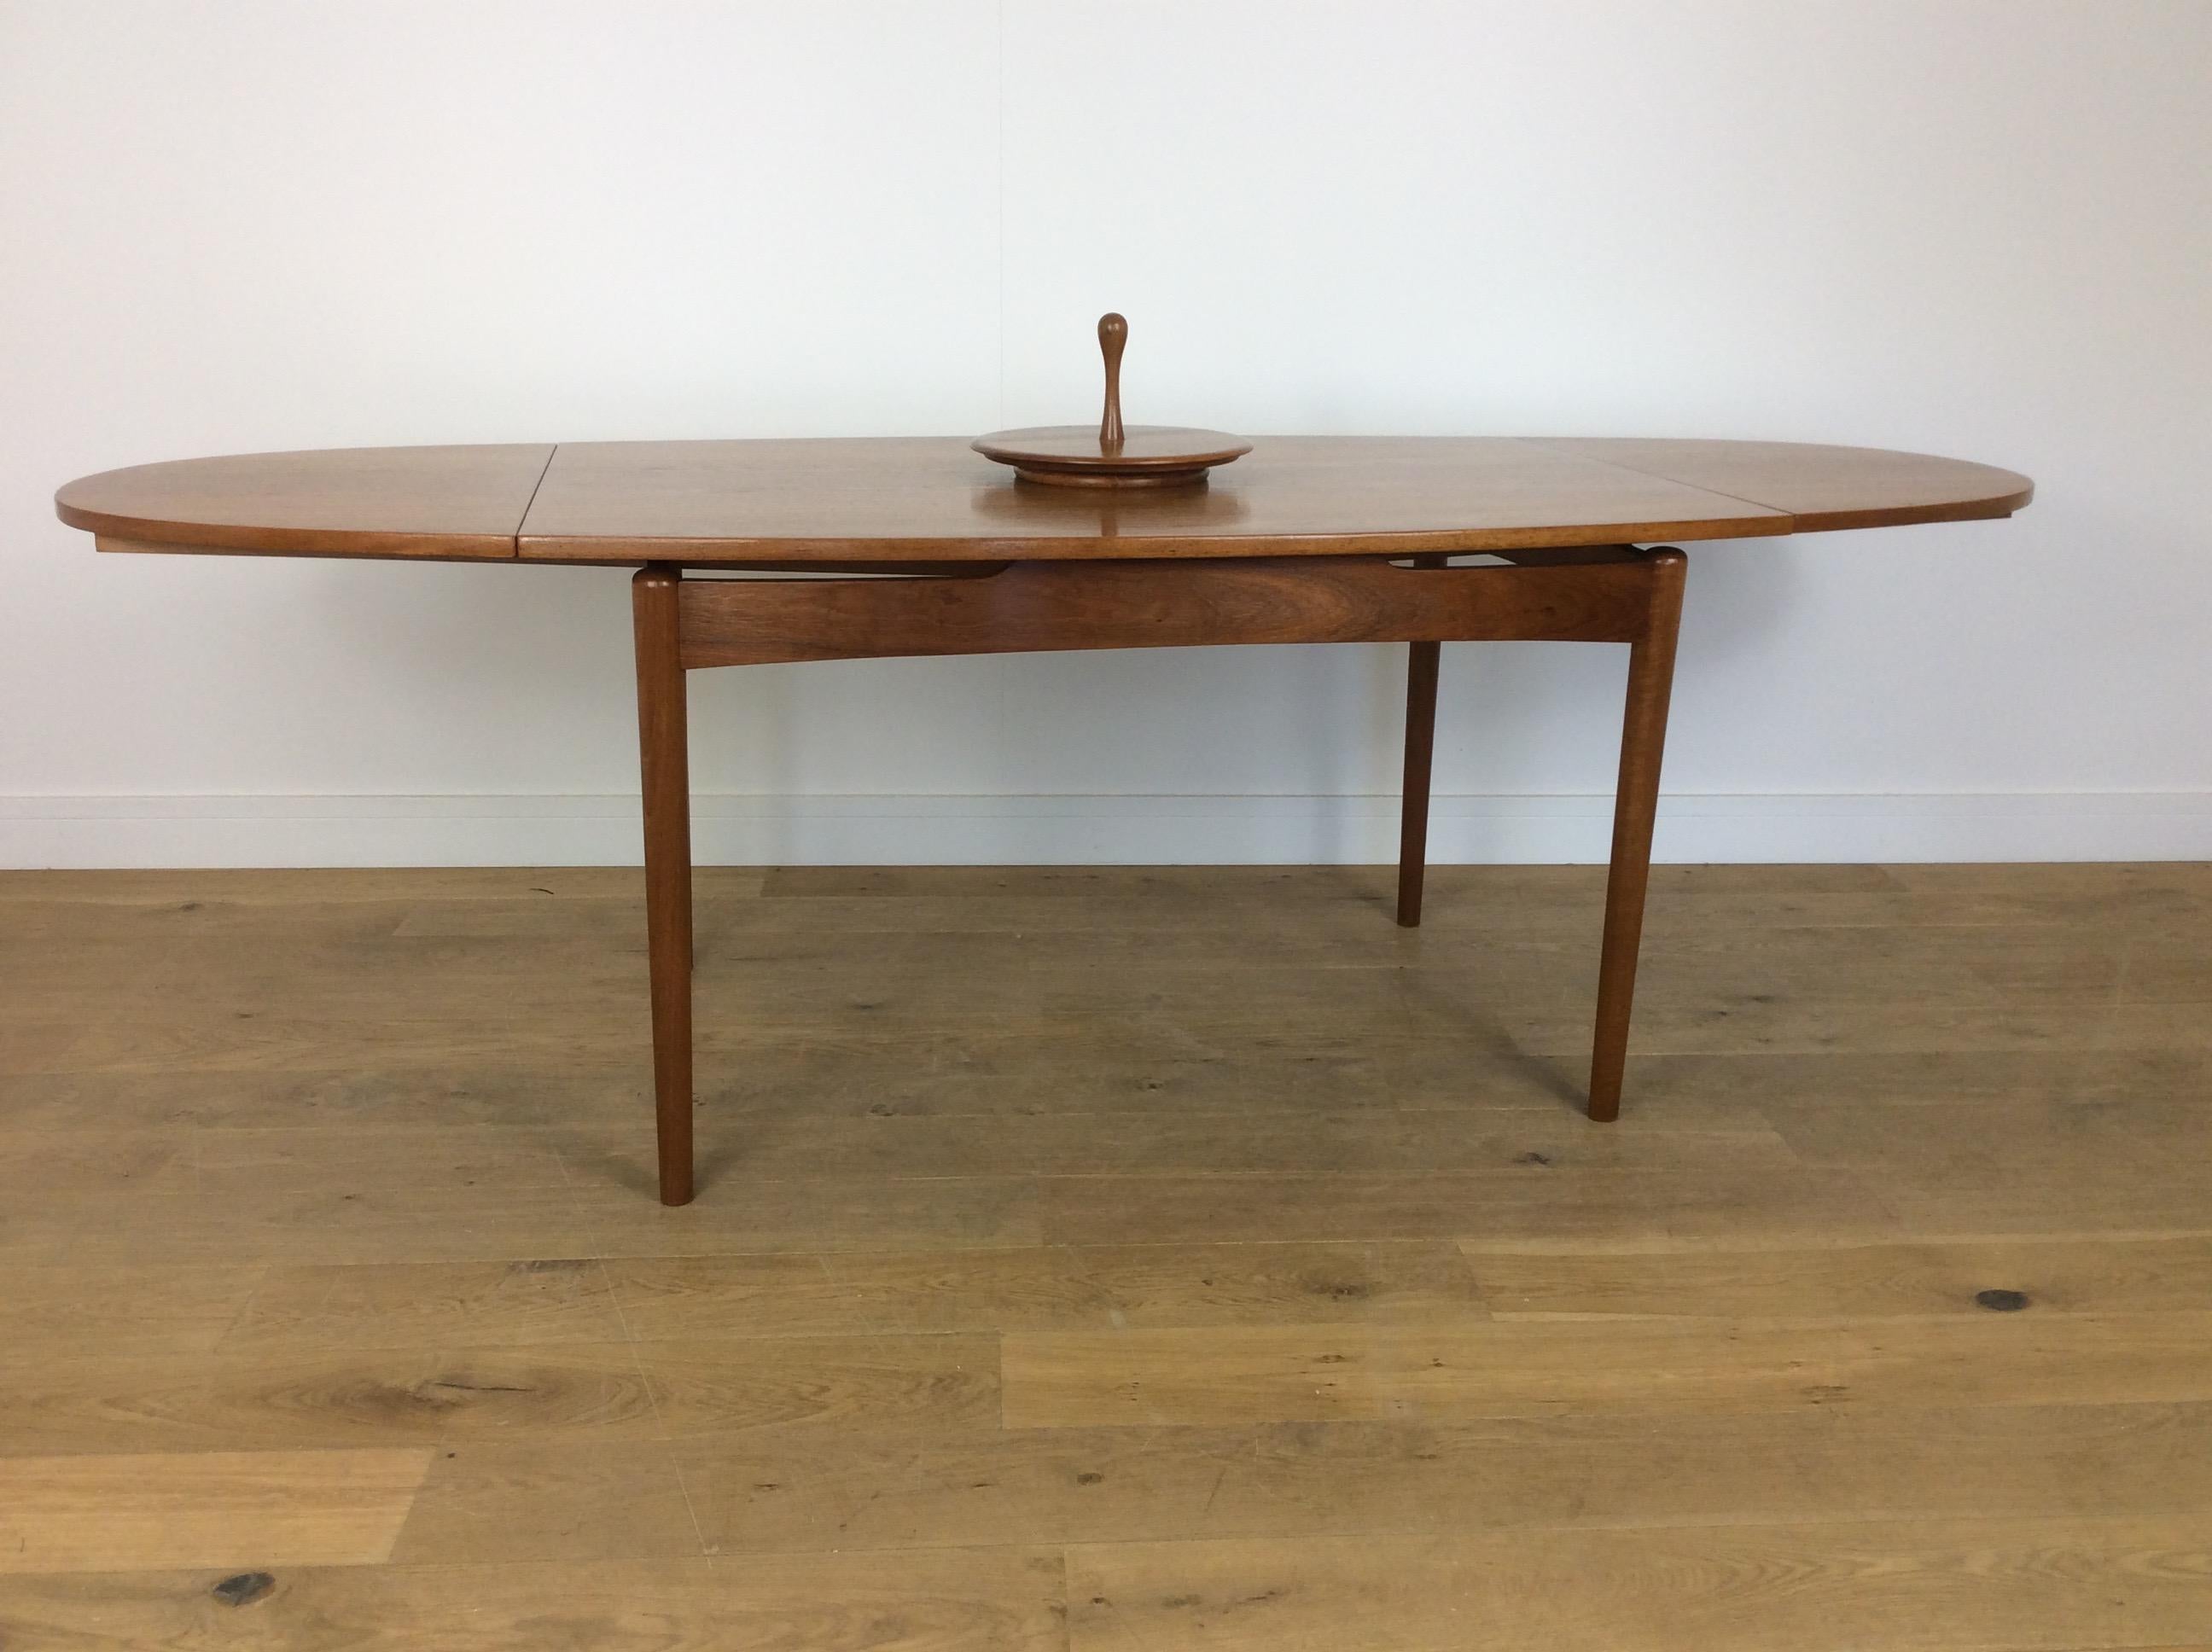 Midcentury dining table.
Midcentury teak extendable dining table with Lazy Susan.
Measures: 75.5 cm H, 137 cm W, 95 cm D each leaf is 50 cm giving an extension to 187 cm or 237 cm, the Lazy Susan is 35 cm diameter, this can be lifted out if not